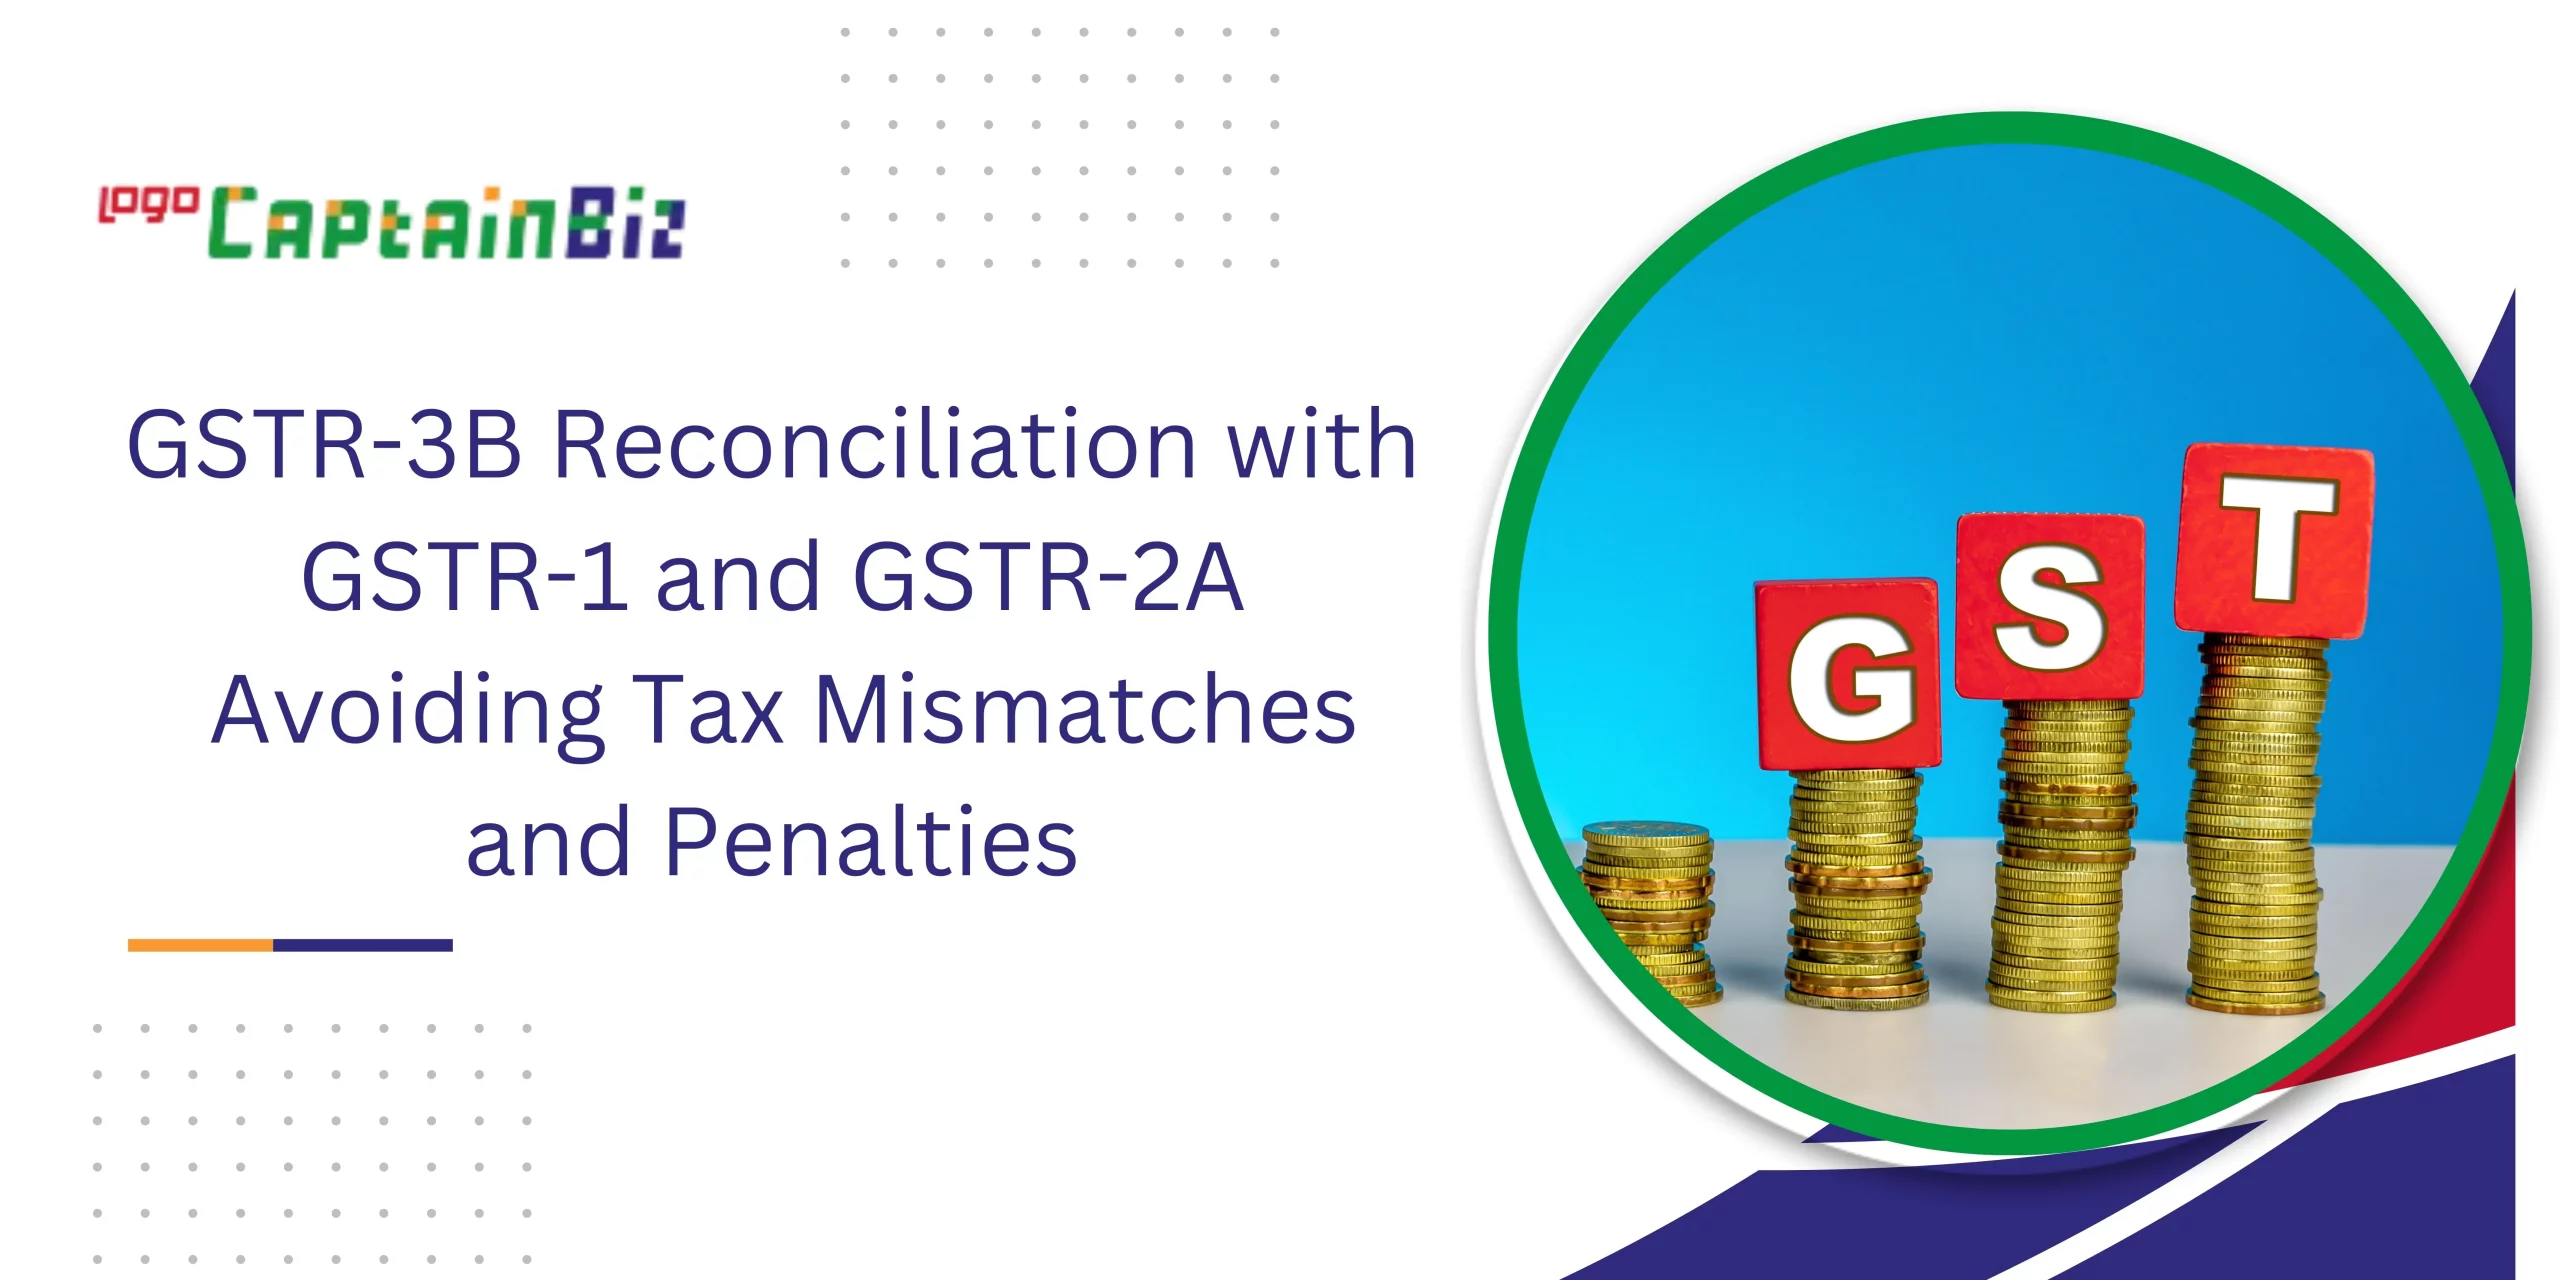 CaptainBiz: GSTR-3B Reconciliation with GSTR-1 and GSTR-2A Avoiding Tax Mismatches and Penalties